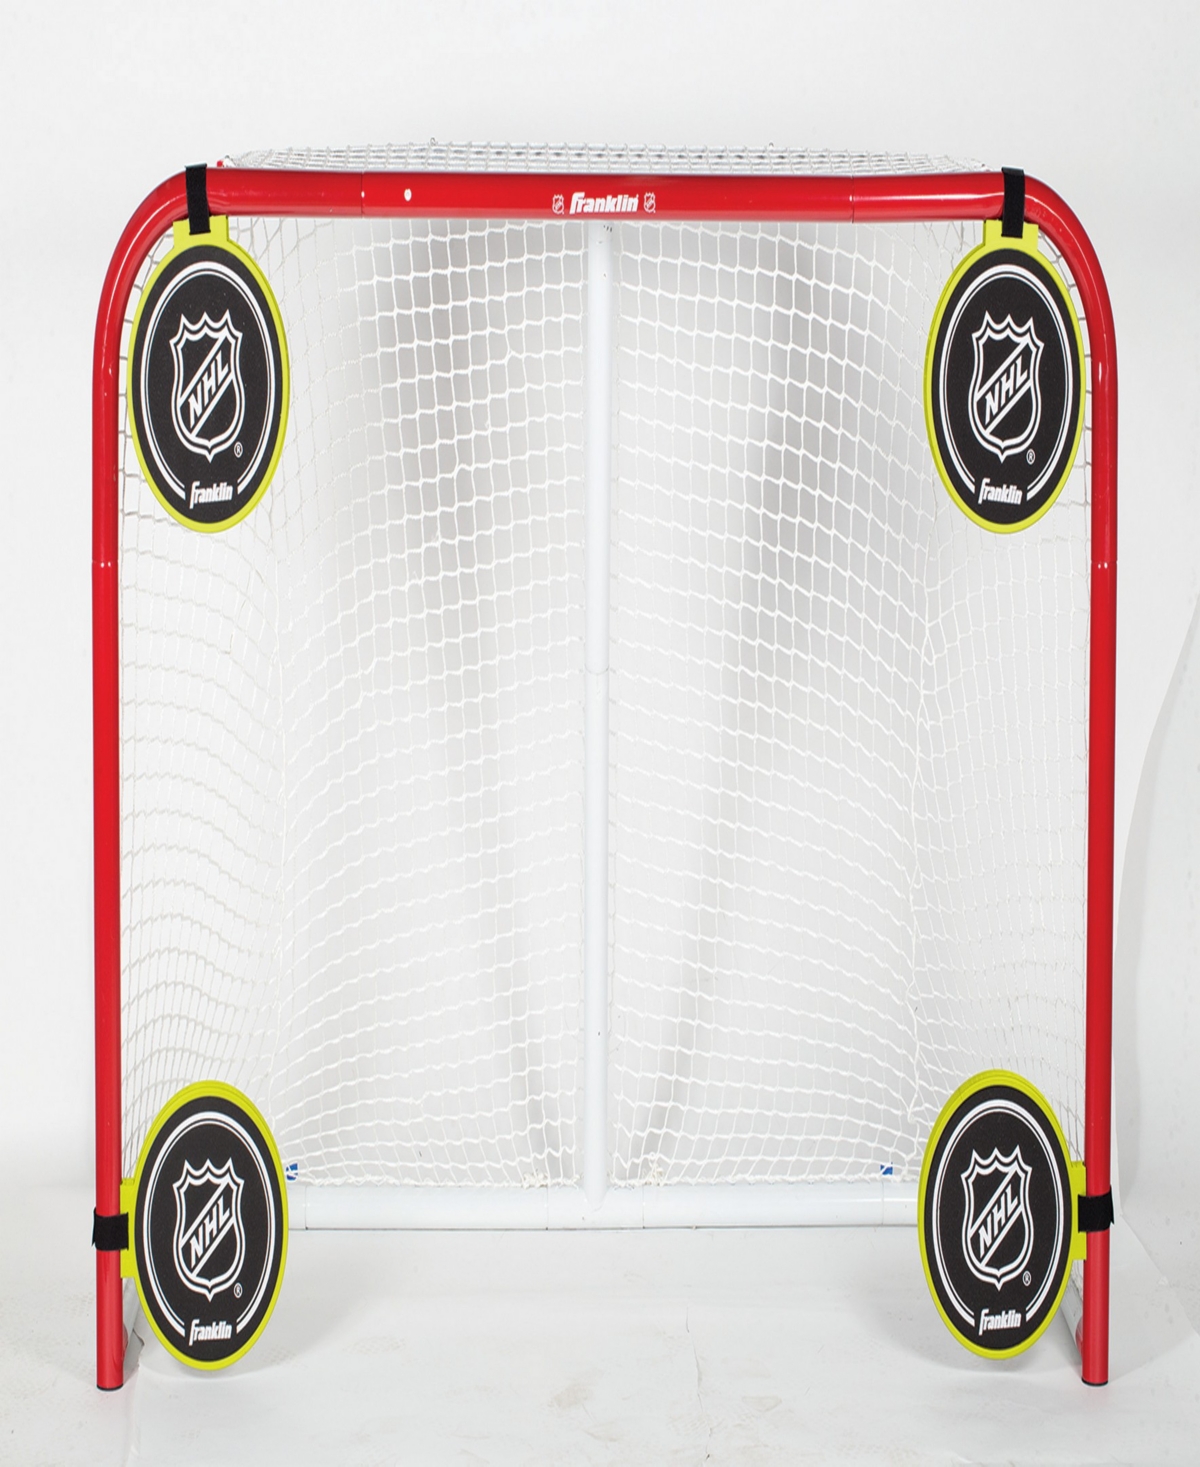 Nhl "Knock - Out" Shooting Targets - Black Yell